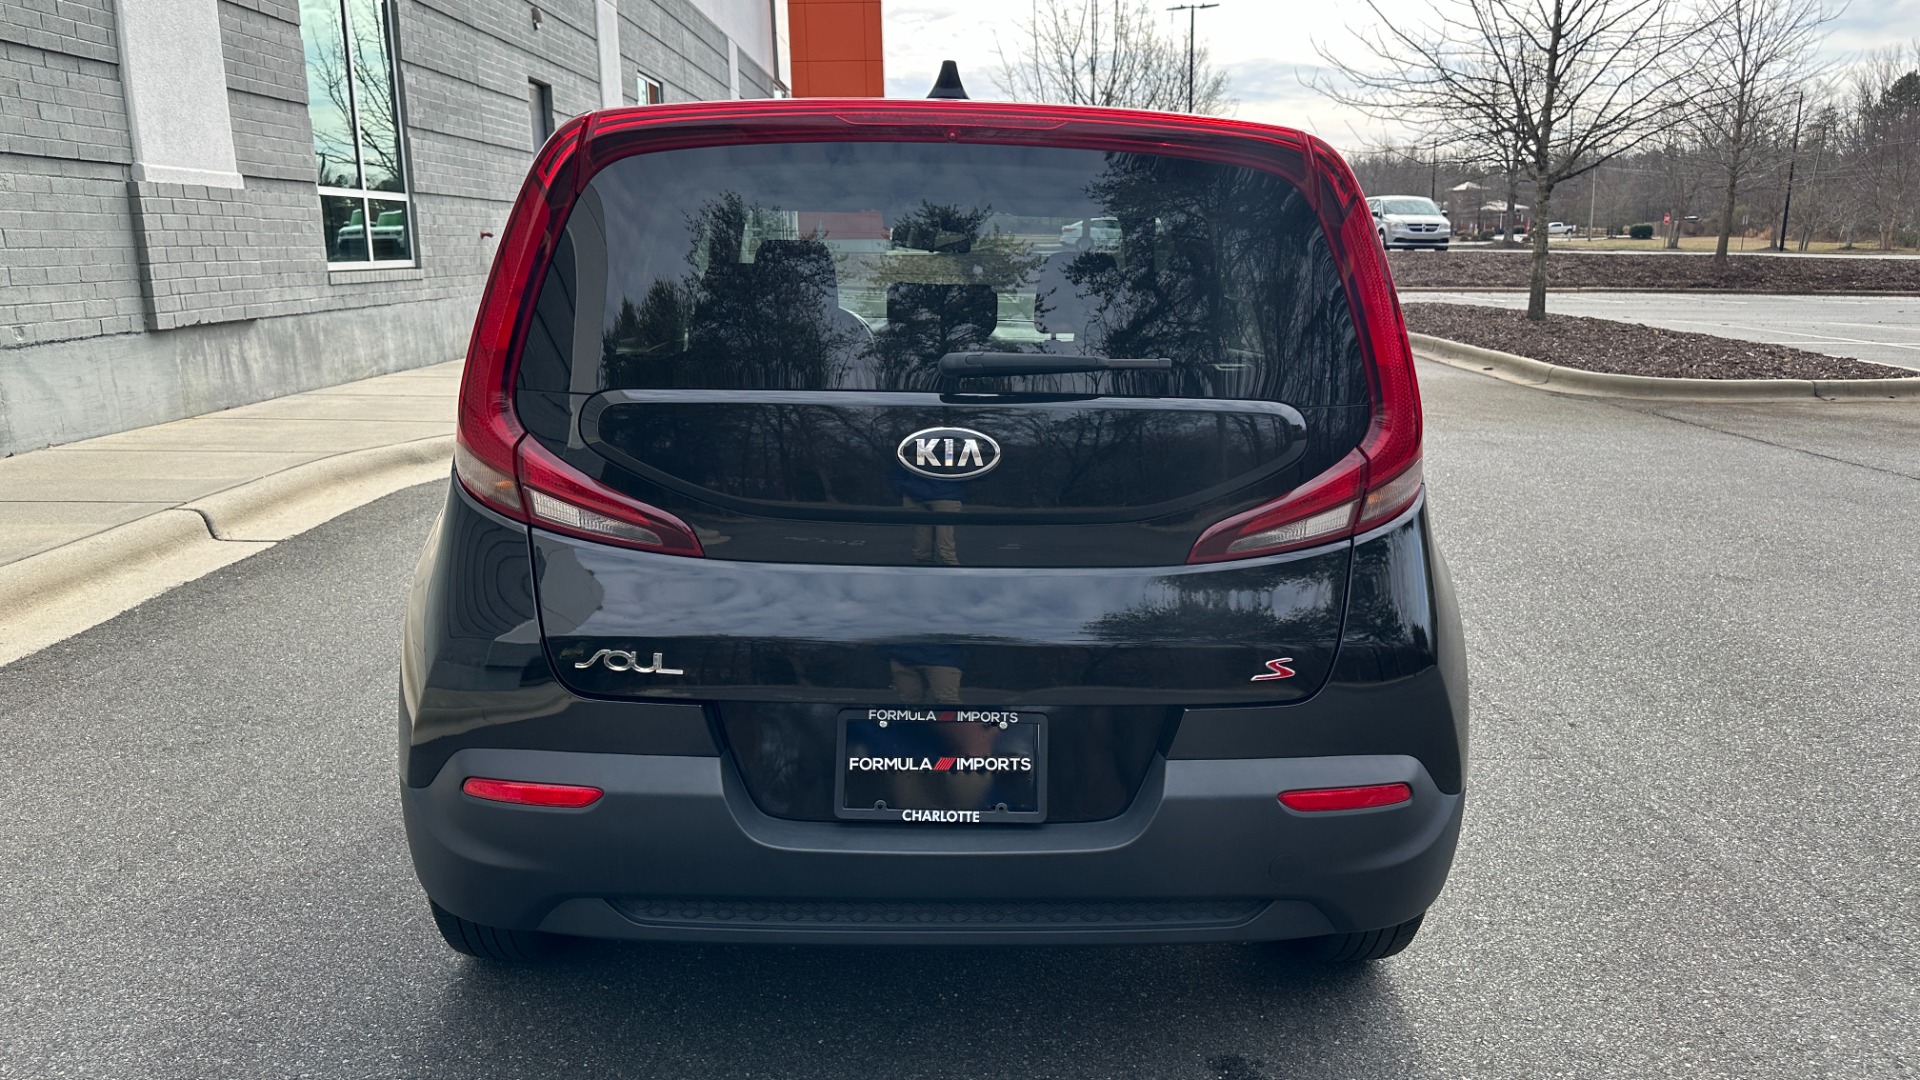 Used 2021 Kia Soul LX / RADIO DISPLAY / 4CYL ENGINE / CARPET FLOOR MATS for sale $17,995 at Formula Imports in Charlotte NC 28227 6